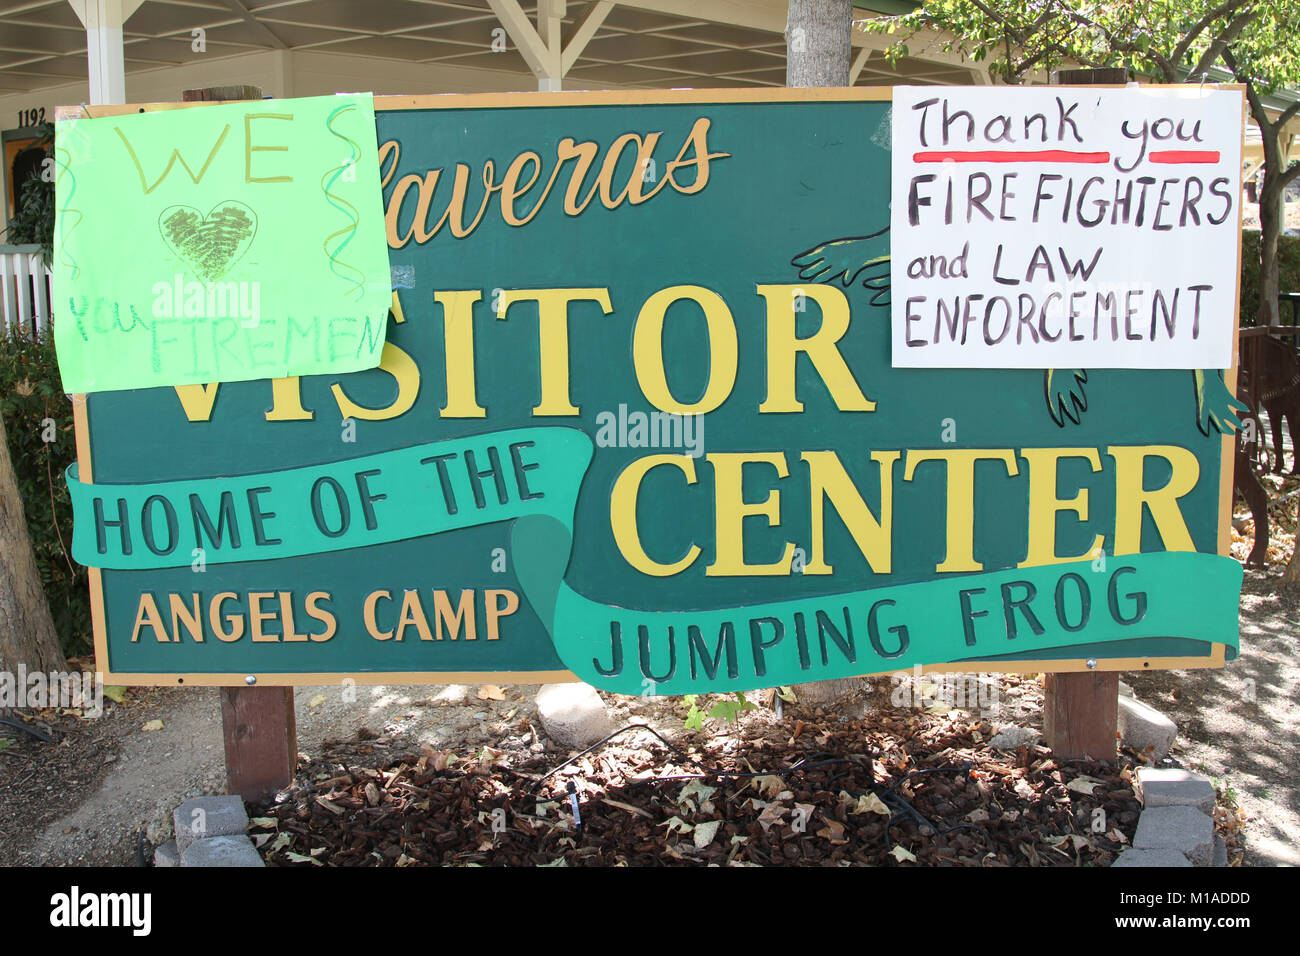 Signs throughout California communities and small cities abound thanking California Army National Guardsmen and other fire-fighting organizations continuously battling Northern California wildfires. (U.S. Army National Guard photo by Staff Sgt. Eddie Siguenza) Stock Photo